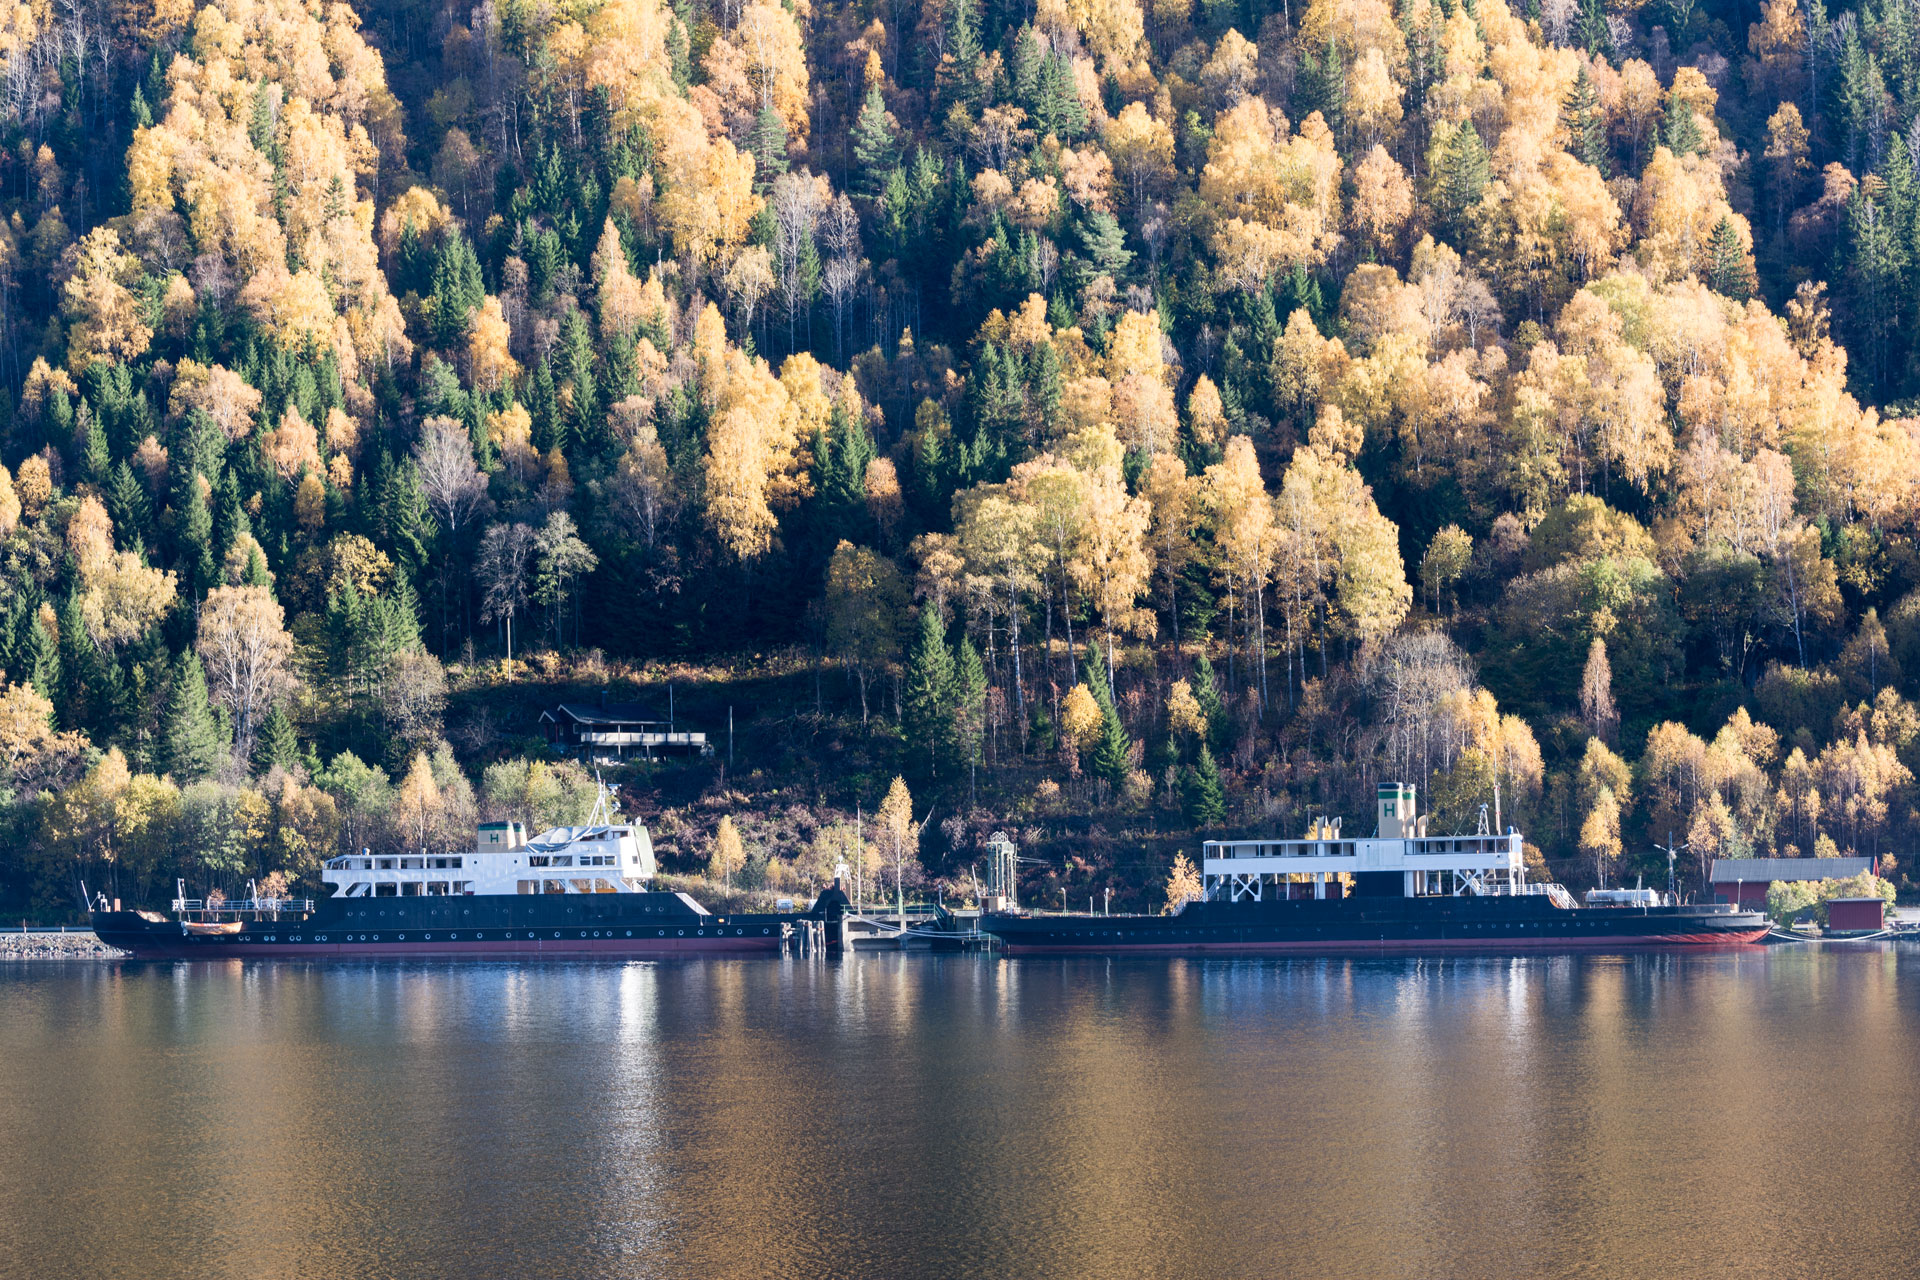 Storegut and Ammonia. The ferries M/F "Storegut" and D/F "Ammonia " are part of the transport system around Rjukan and Notodden which consists of the Tinnos Line ferries on Lake Tinnsjøen and the Rjukan Line. Photo: Per Berntsen, the Directorate for Cultural Heritage